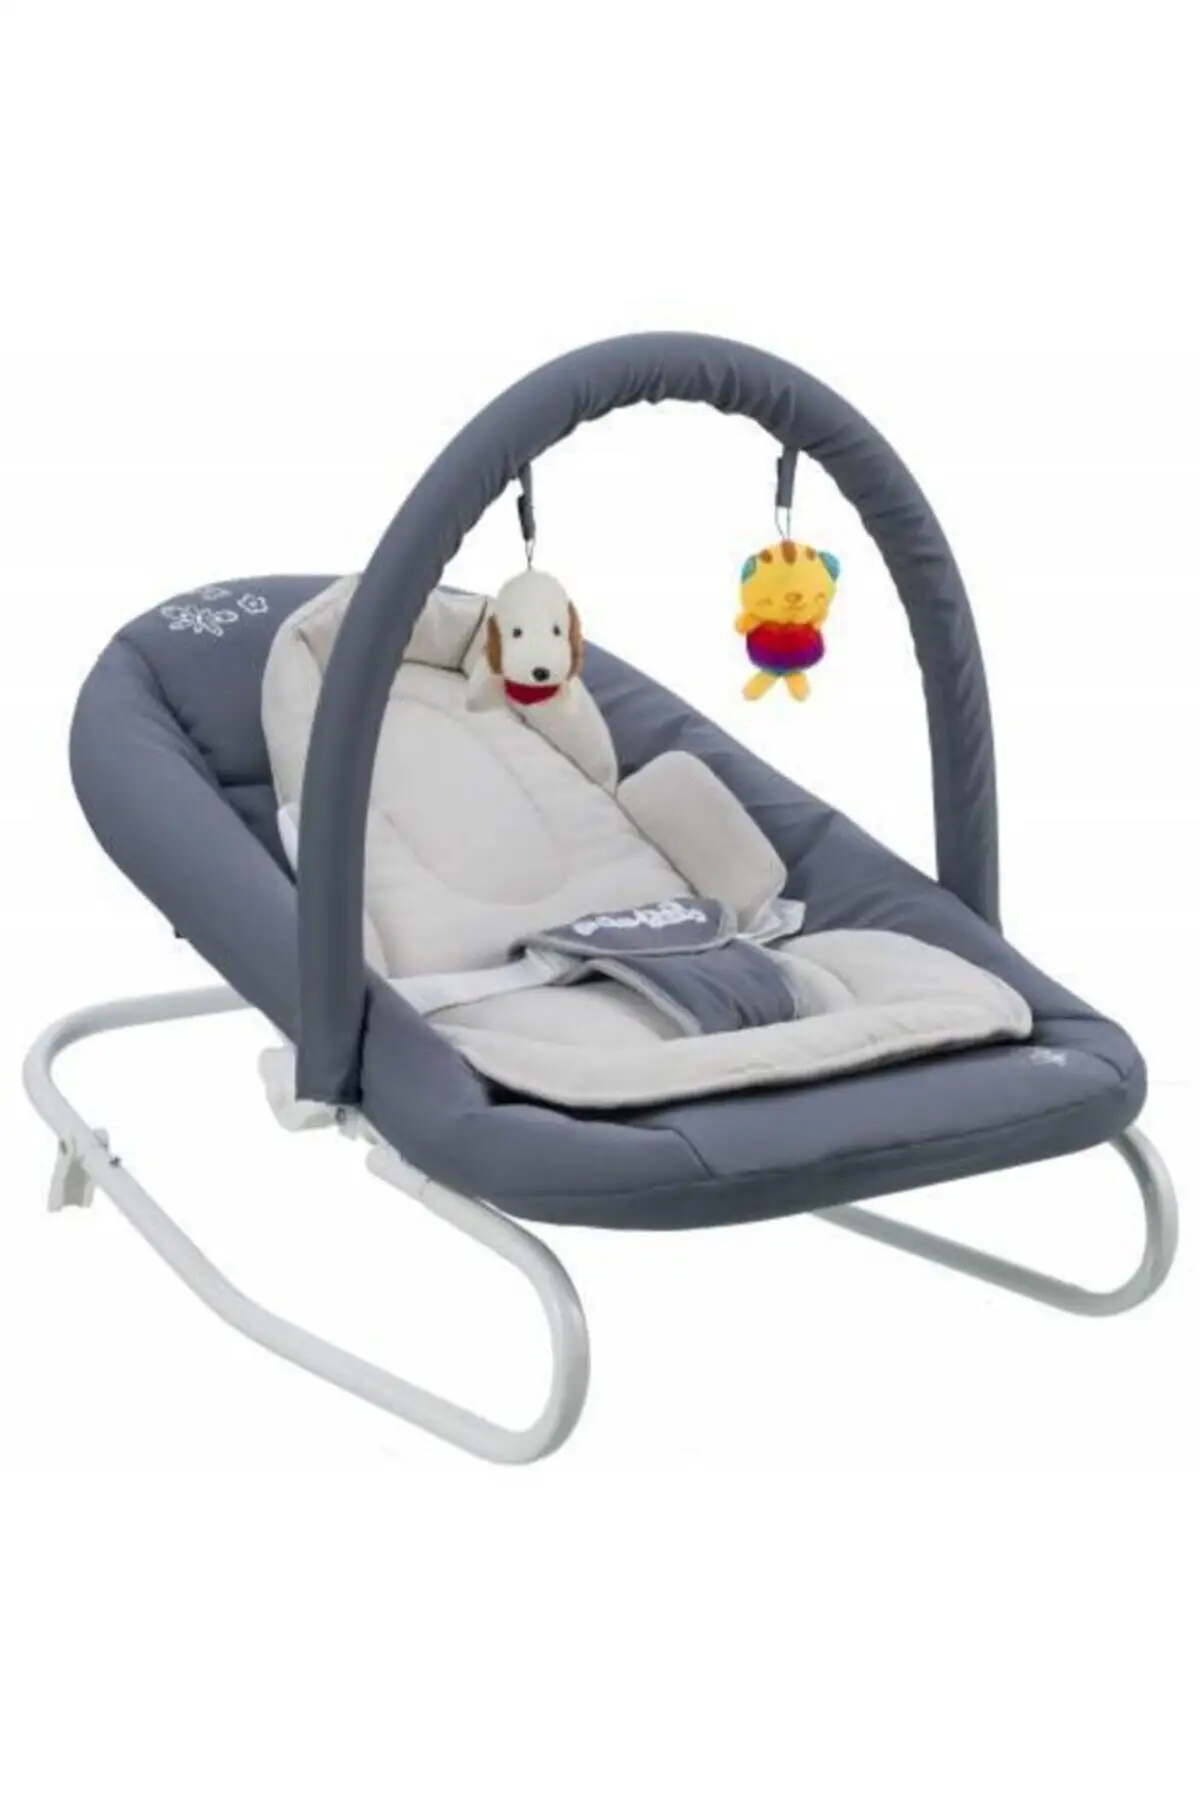 Baby Crib Mother Gray Home Type Carriage Stroller Parking Bed Basket Cradle Swing Newborn Mine Bassinet For Baby Bassinet Beside